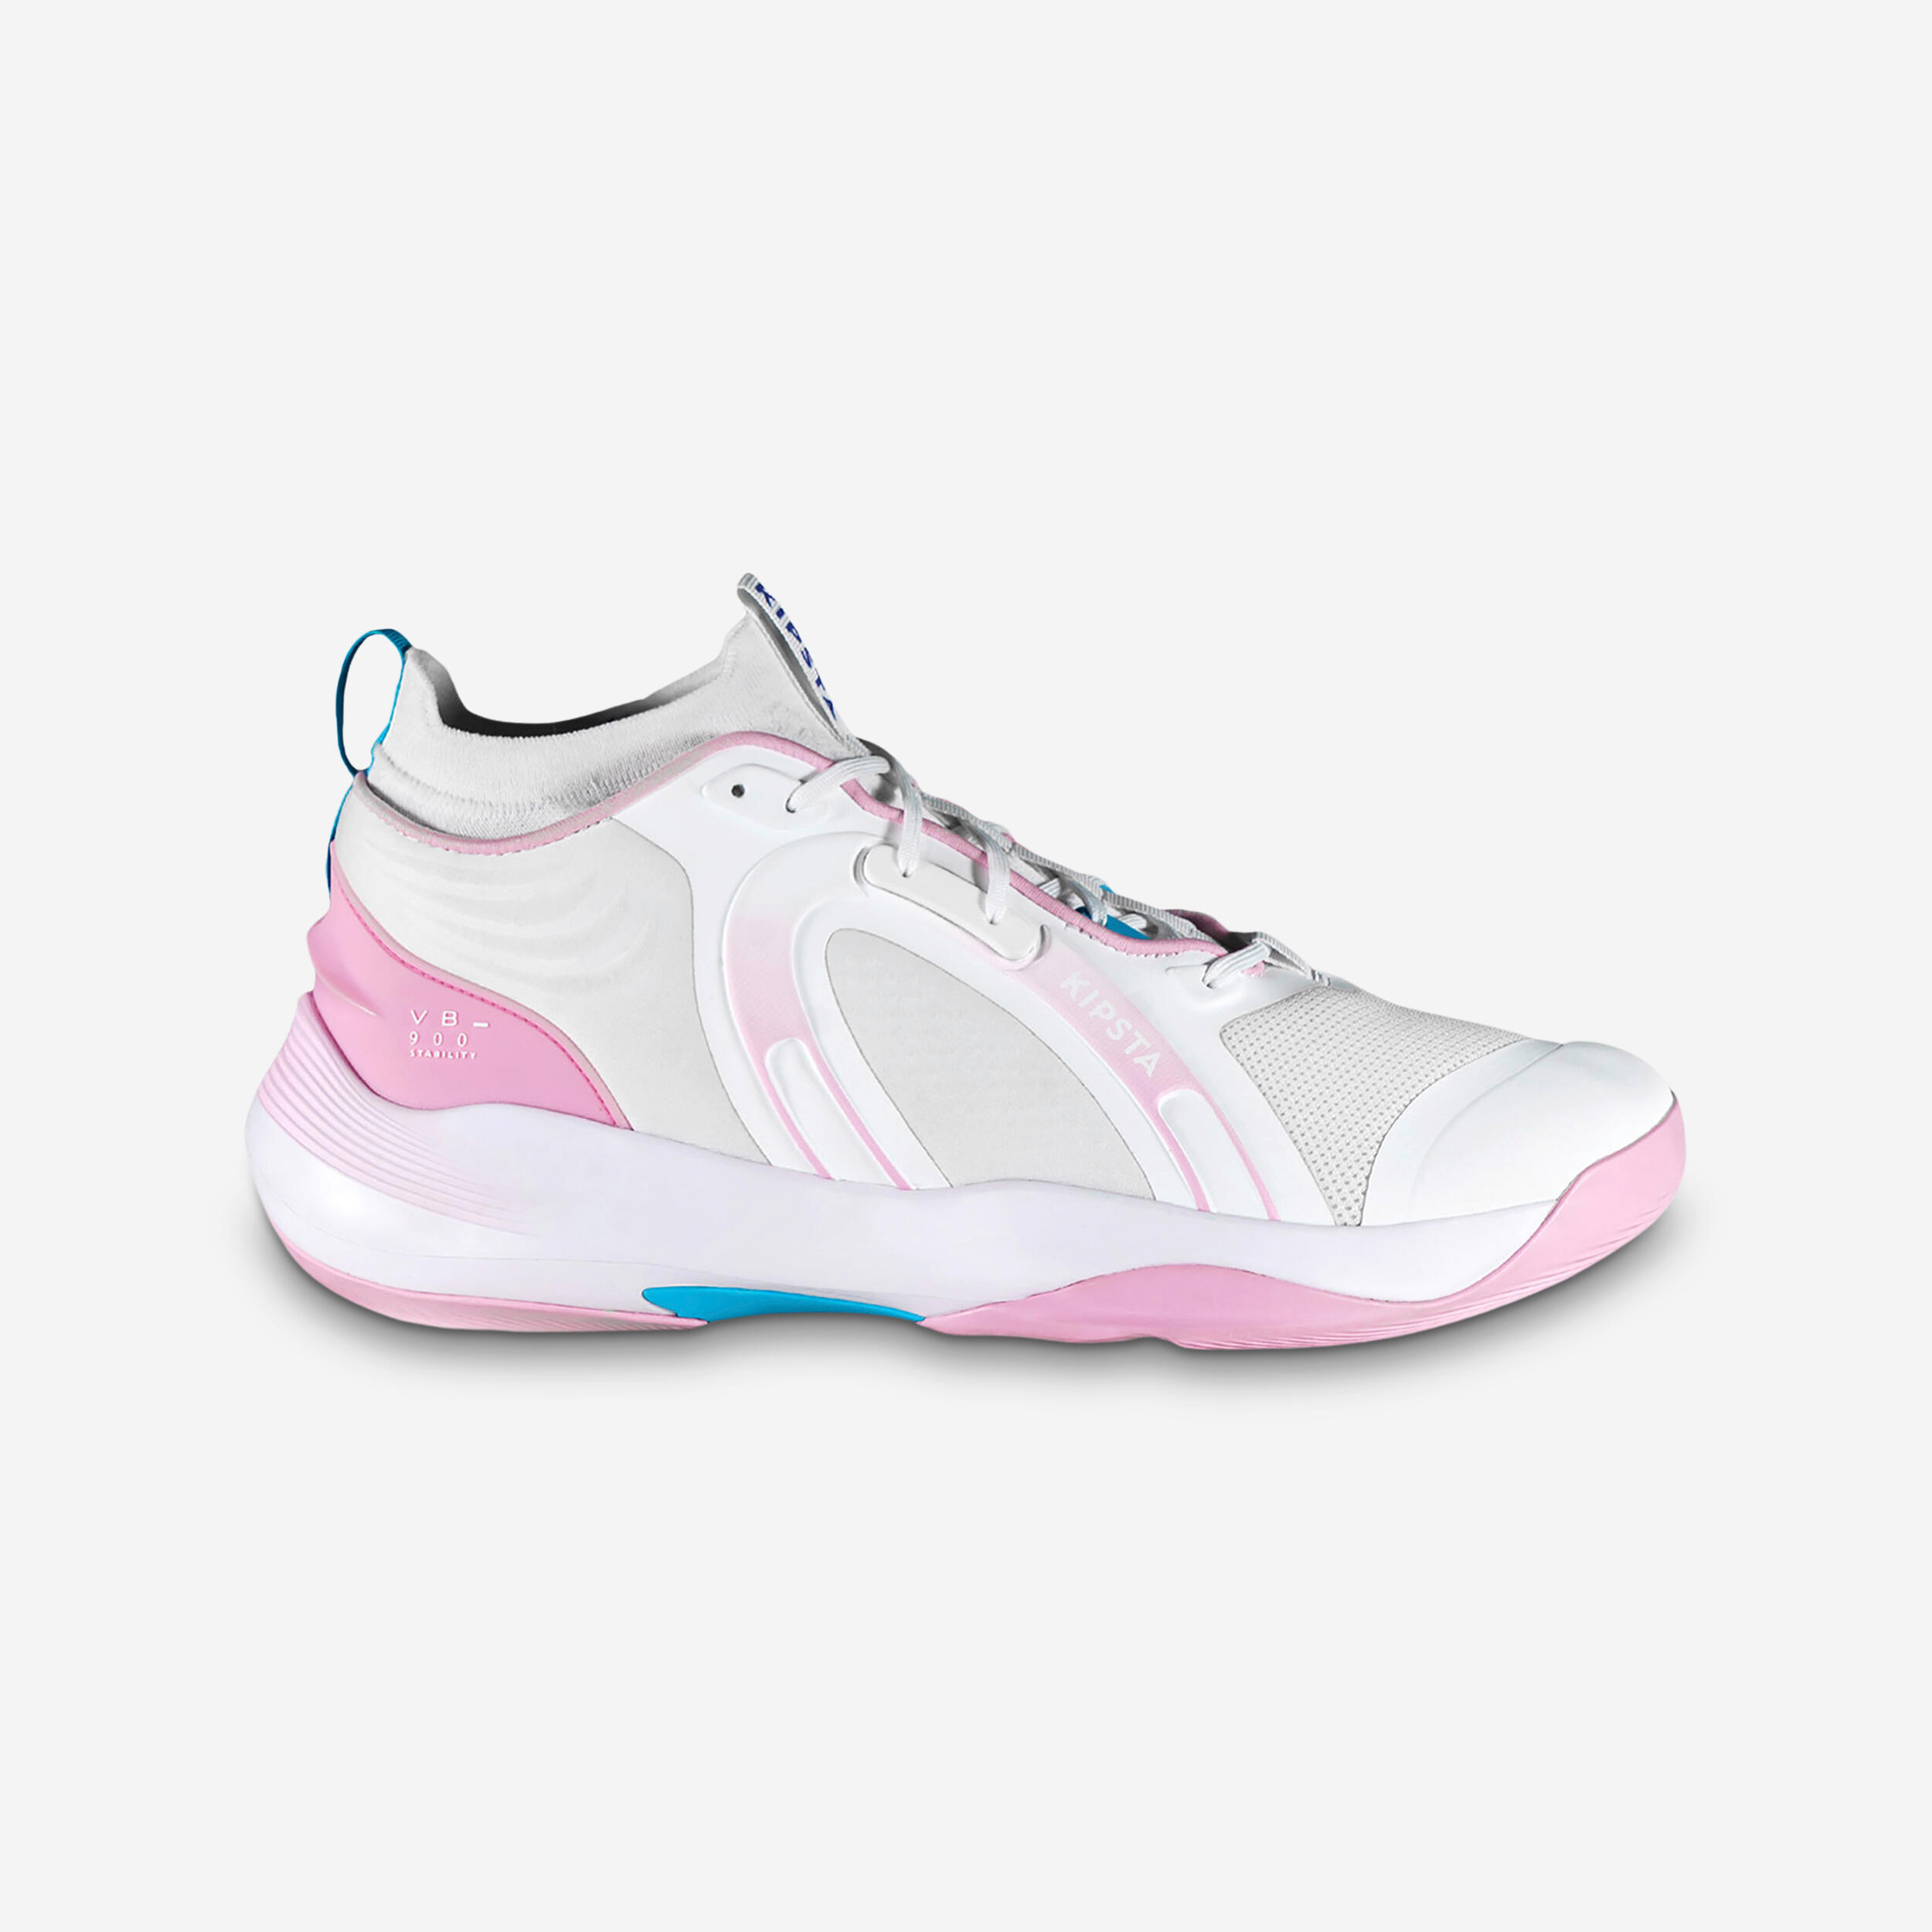 KIPSTA Chaussures De Volley-Ball Femme - Vb900 Stability Rose Alessia Orro